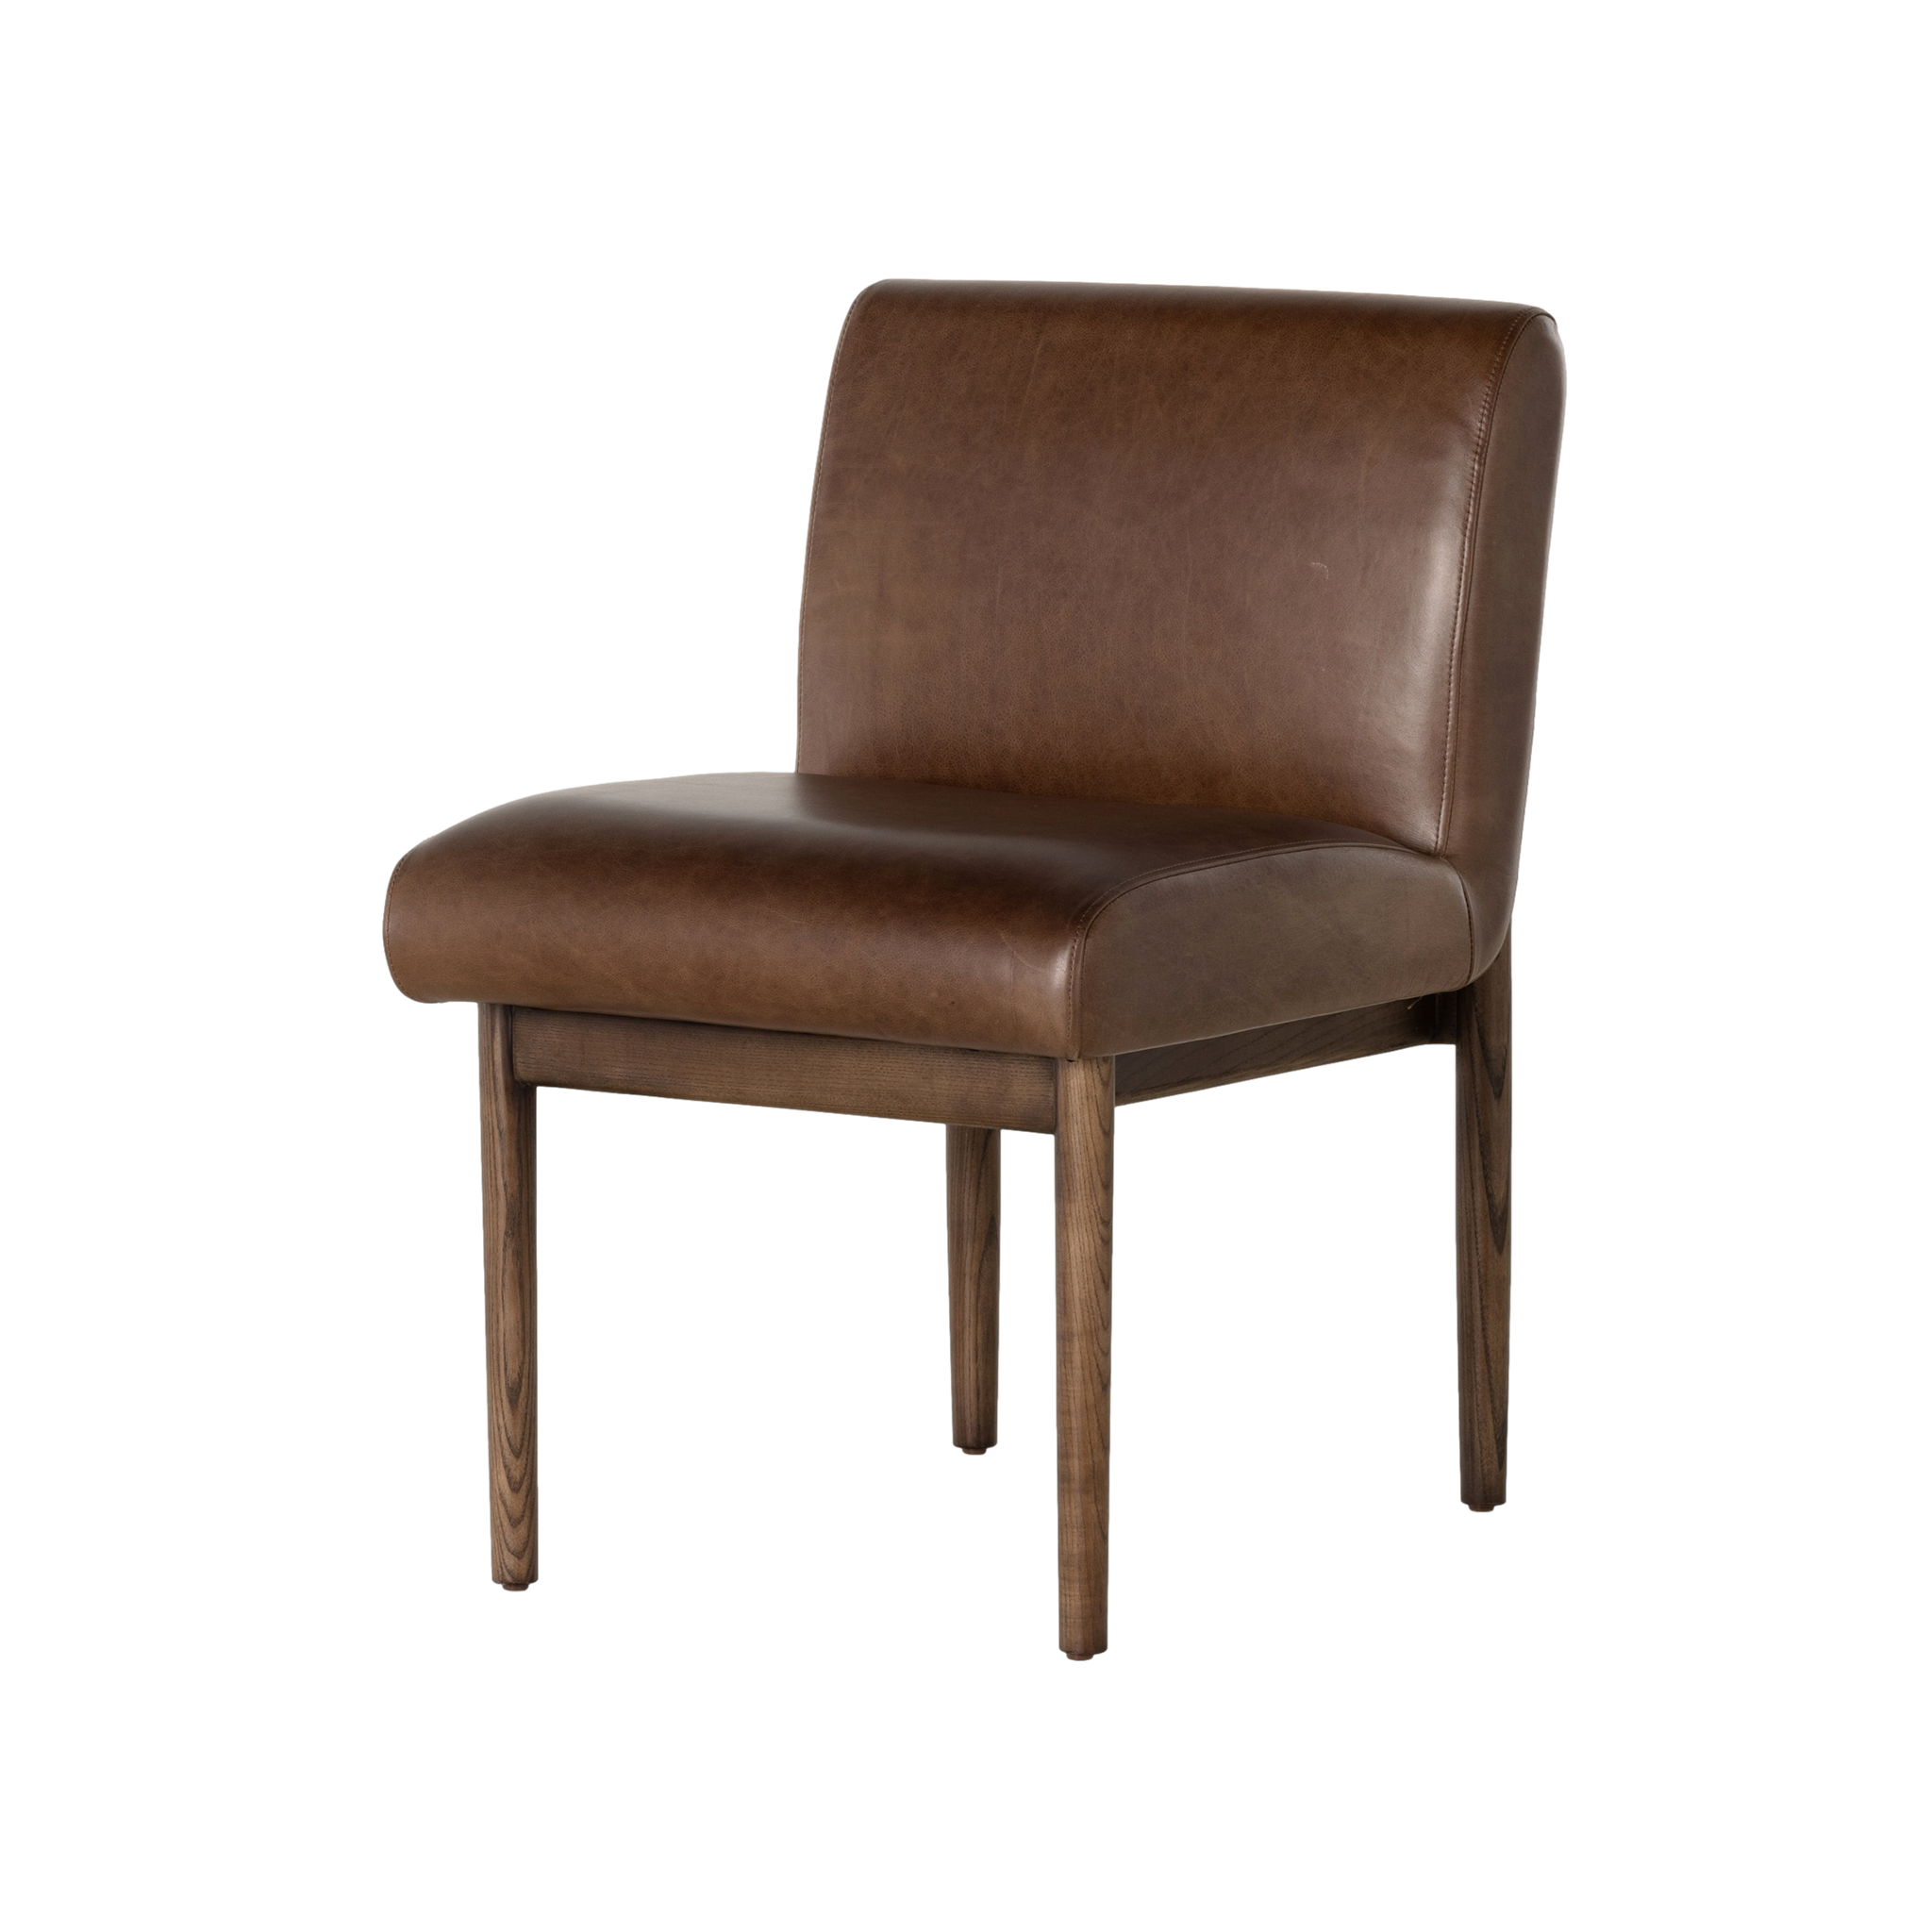 Marika Dining Chair in Coco